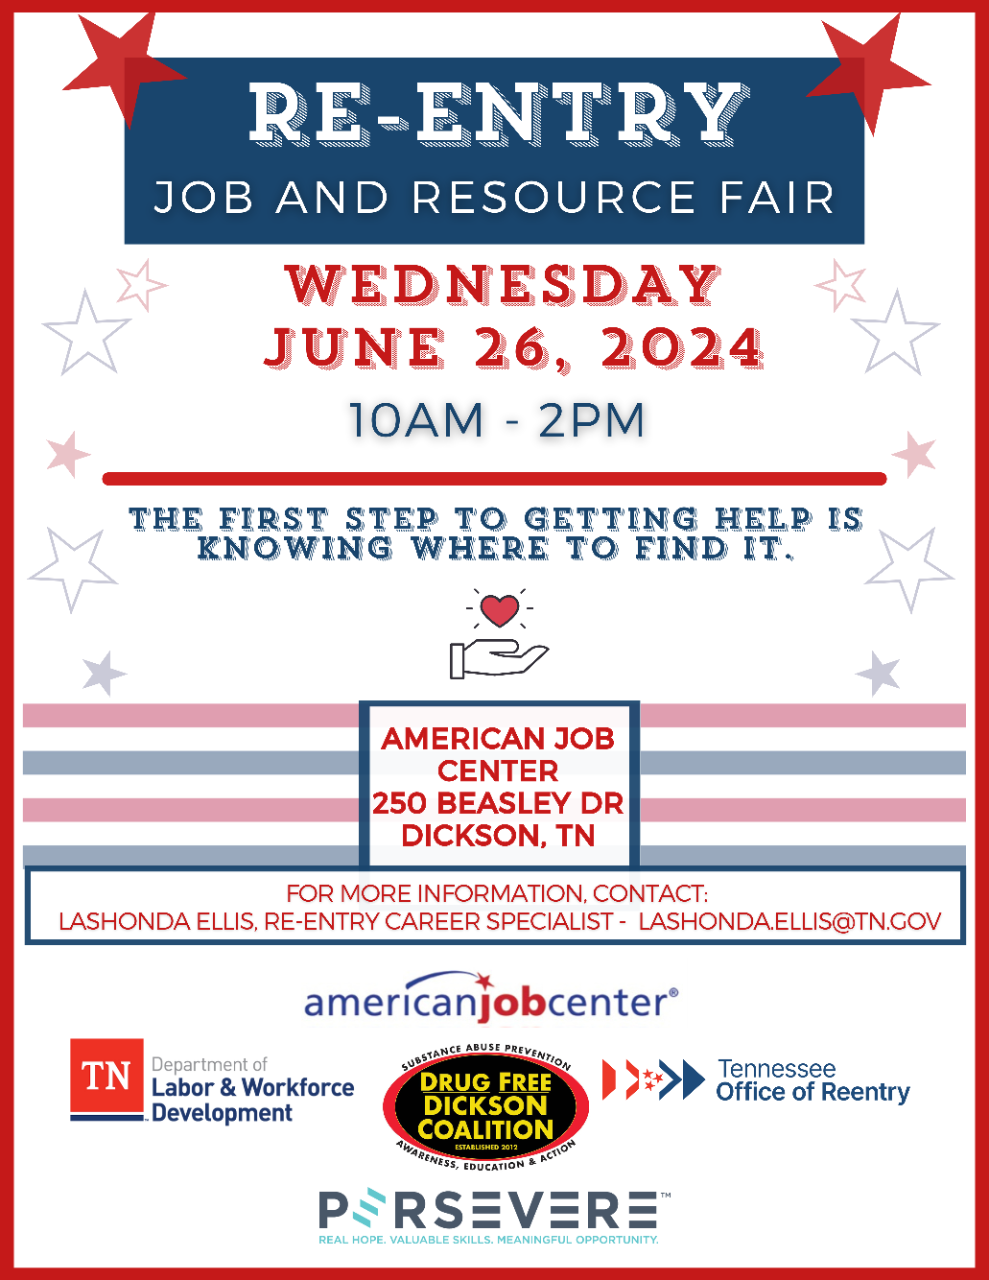 The Dickson Reentry Job and Resource Fair is June 26, 2024